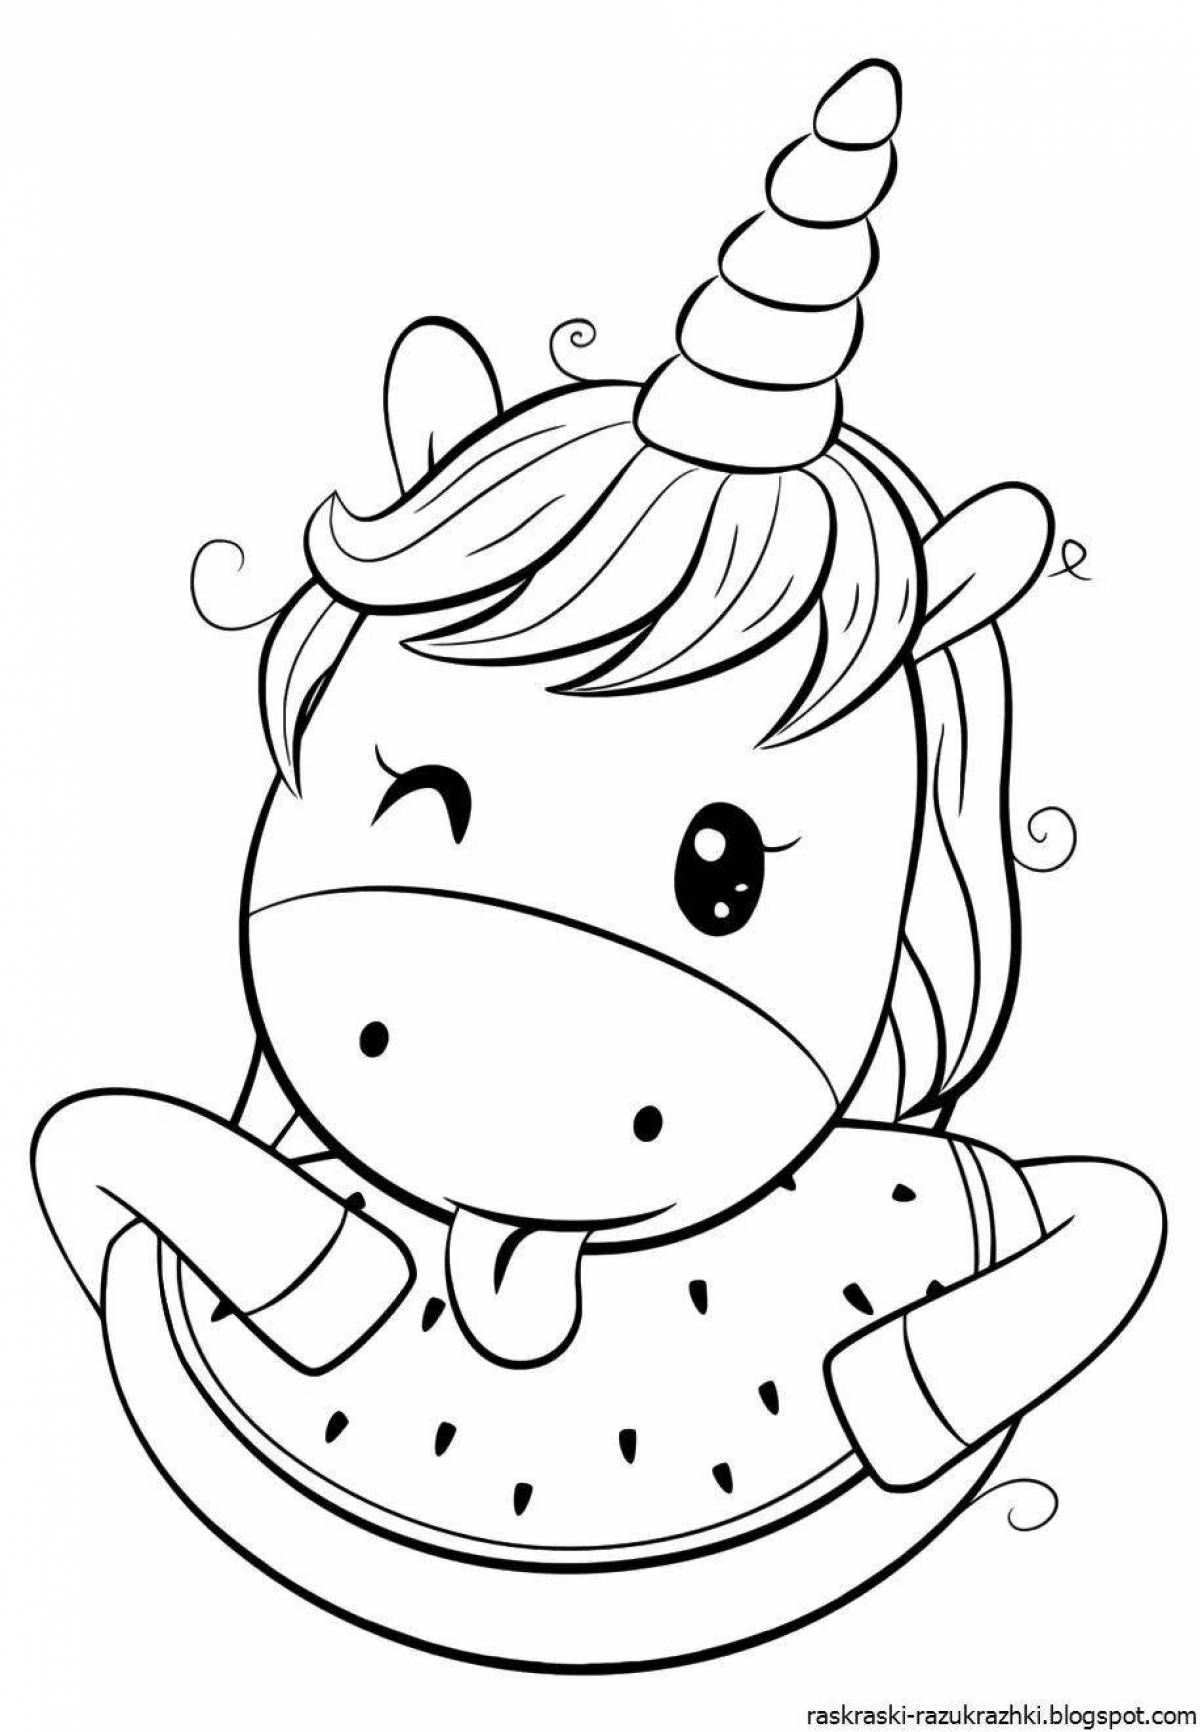 Charming coloring book for girls 7 years old unicorn